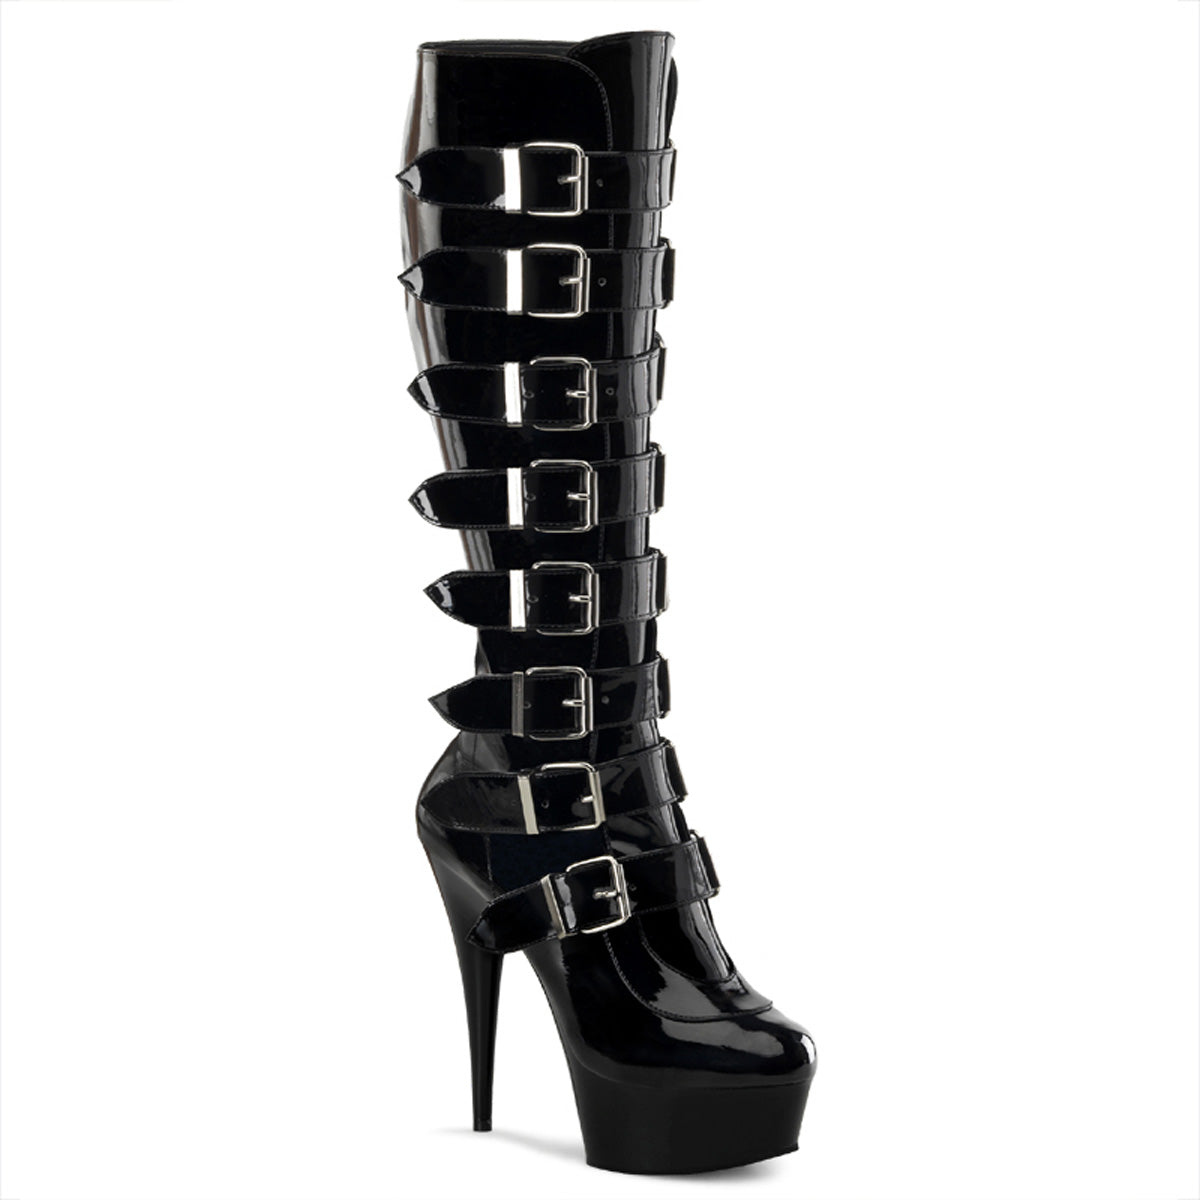 DELIGHT-2049 6 Inch Heel Black Patent Pole Dancing Platforms-Pleaser- Sexy Shoes